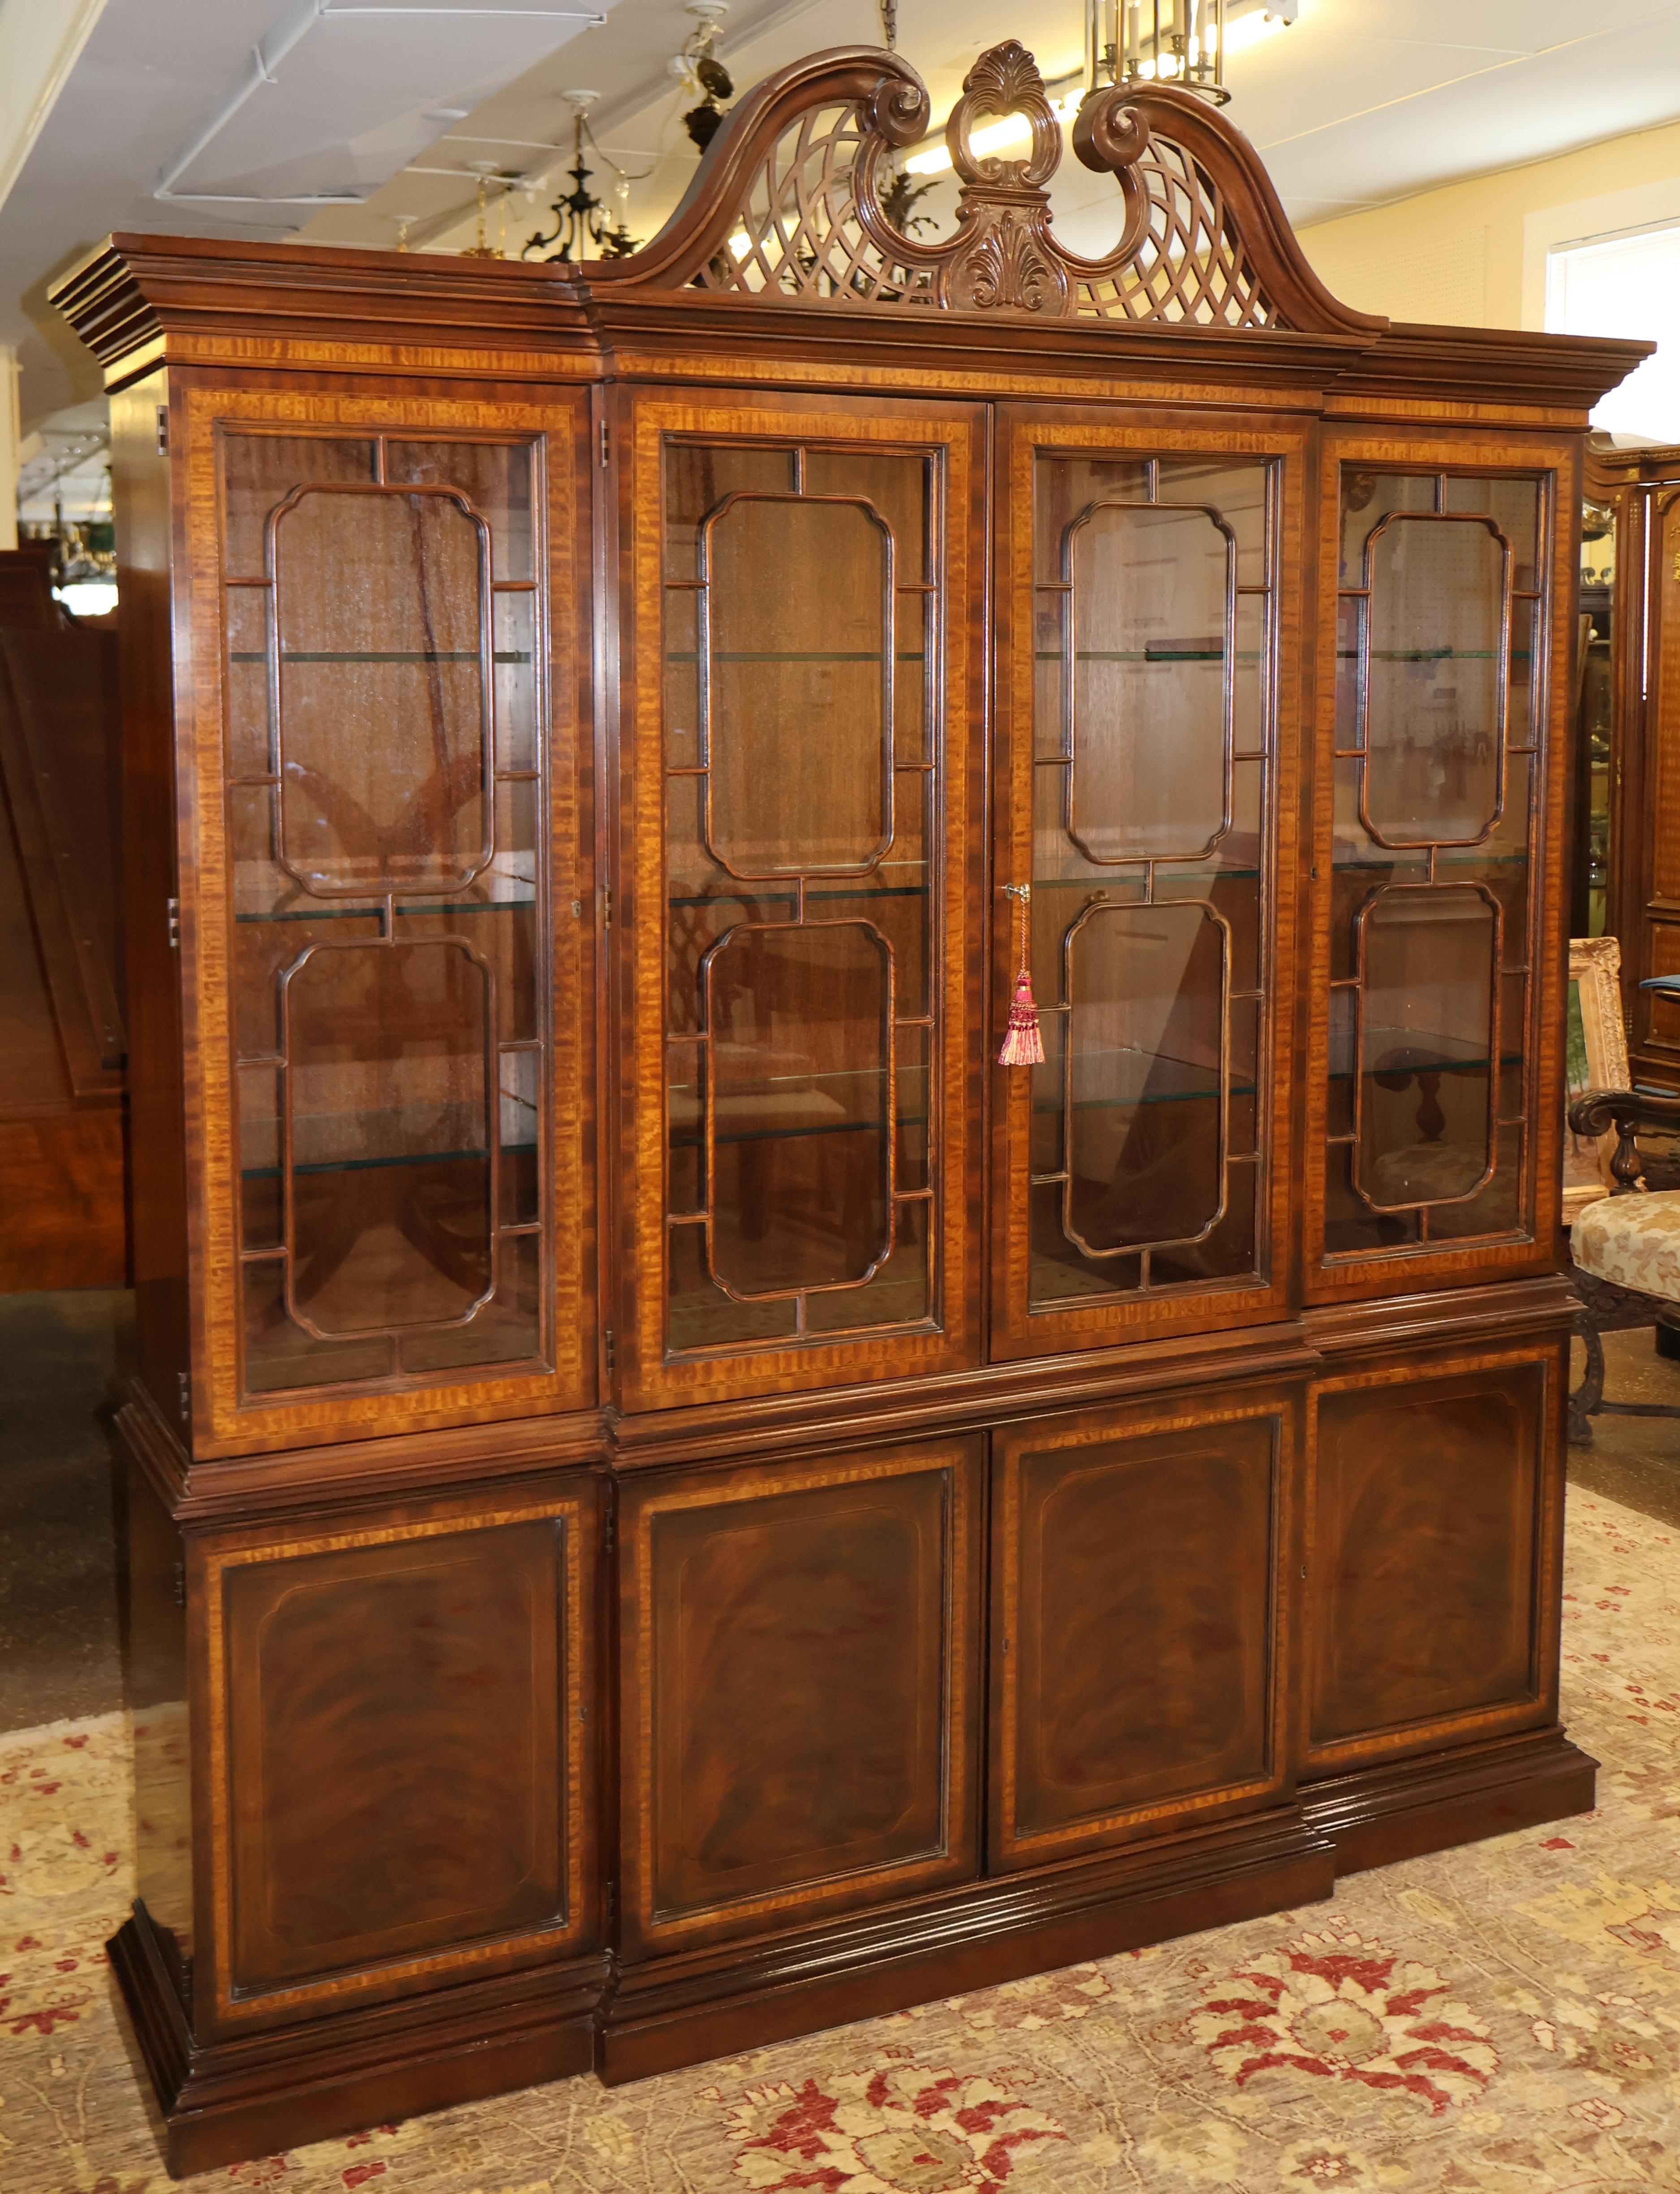 Regency Flame Mahogany Heritage Heirlooms Drexel Bookcase China Cabinet Breakfront For Sale